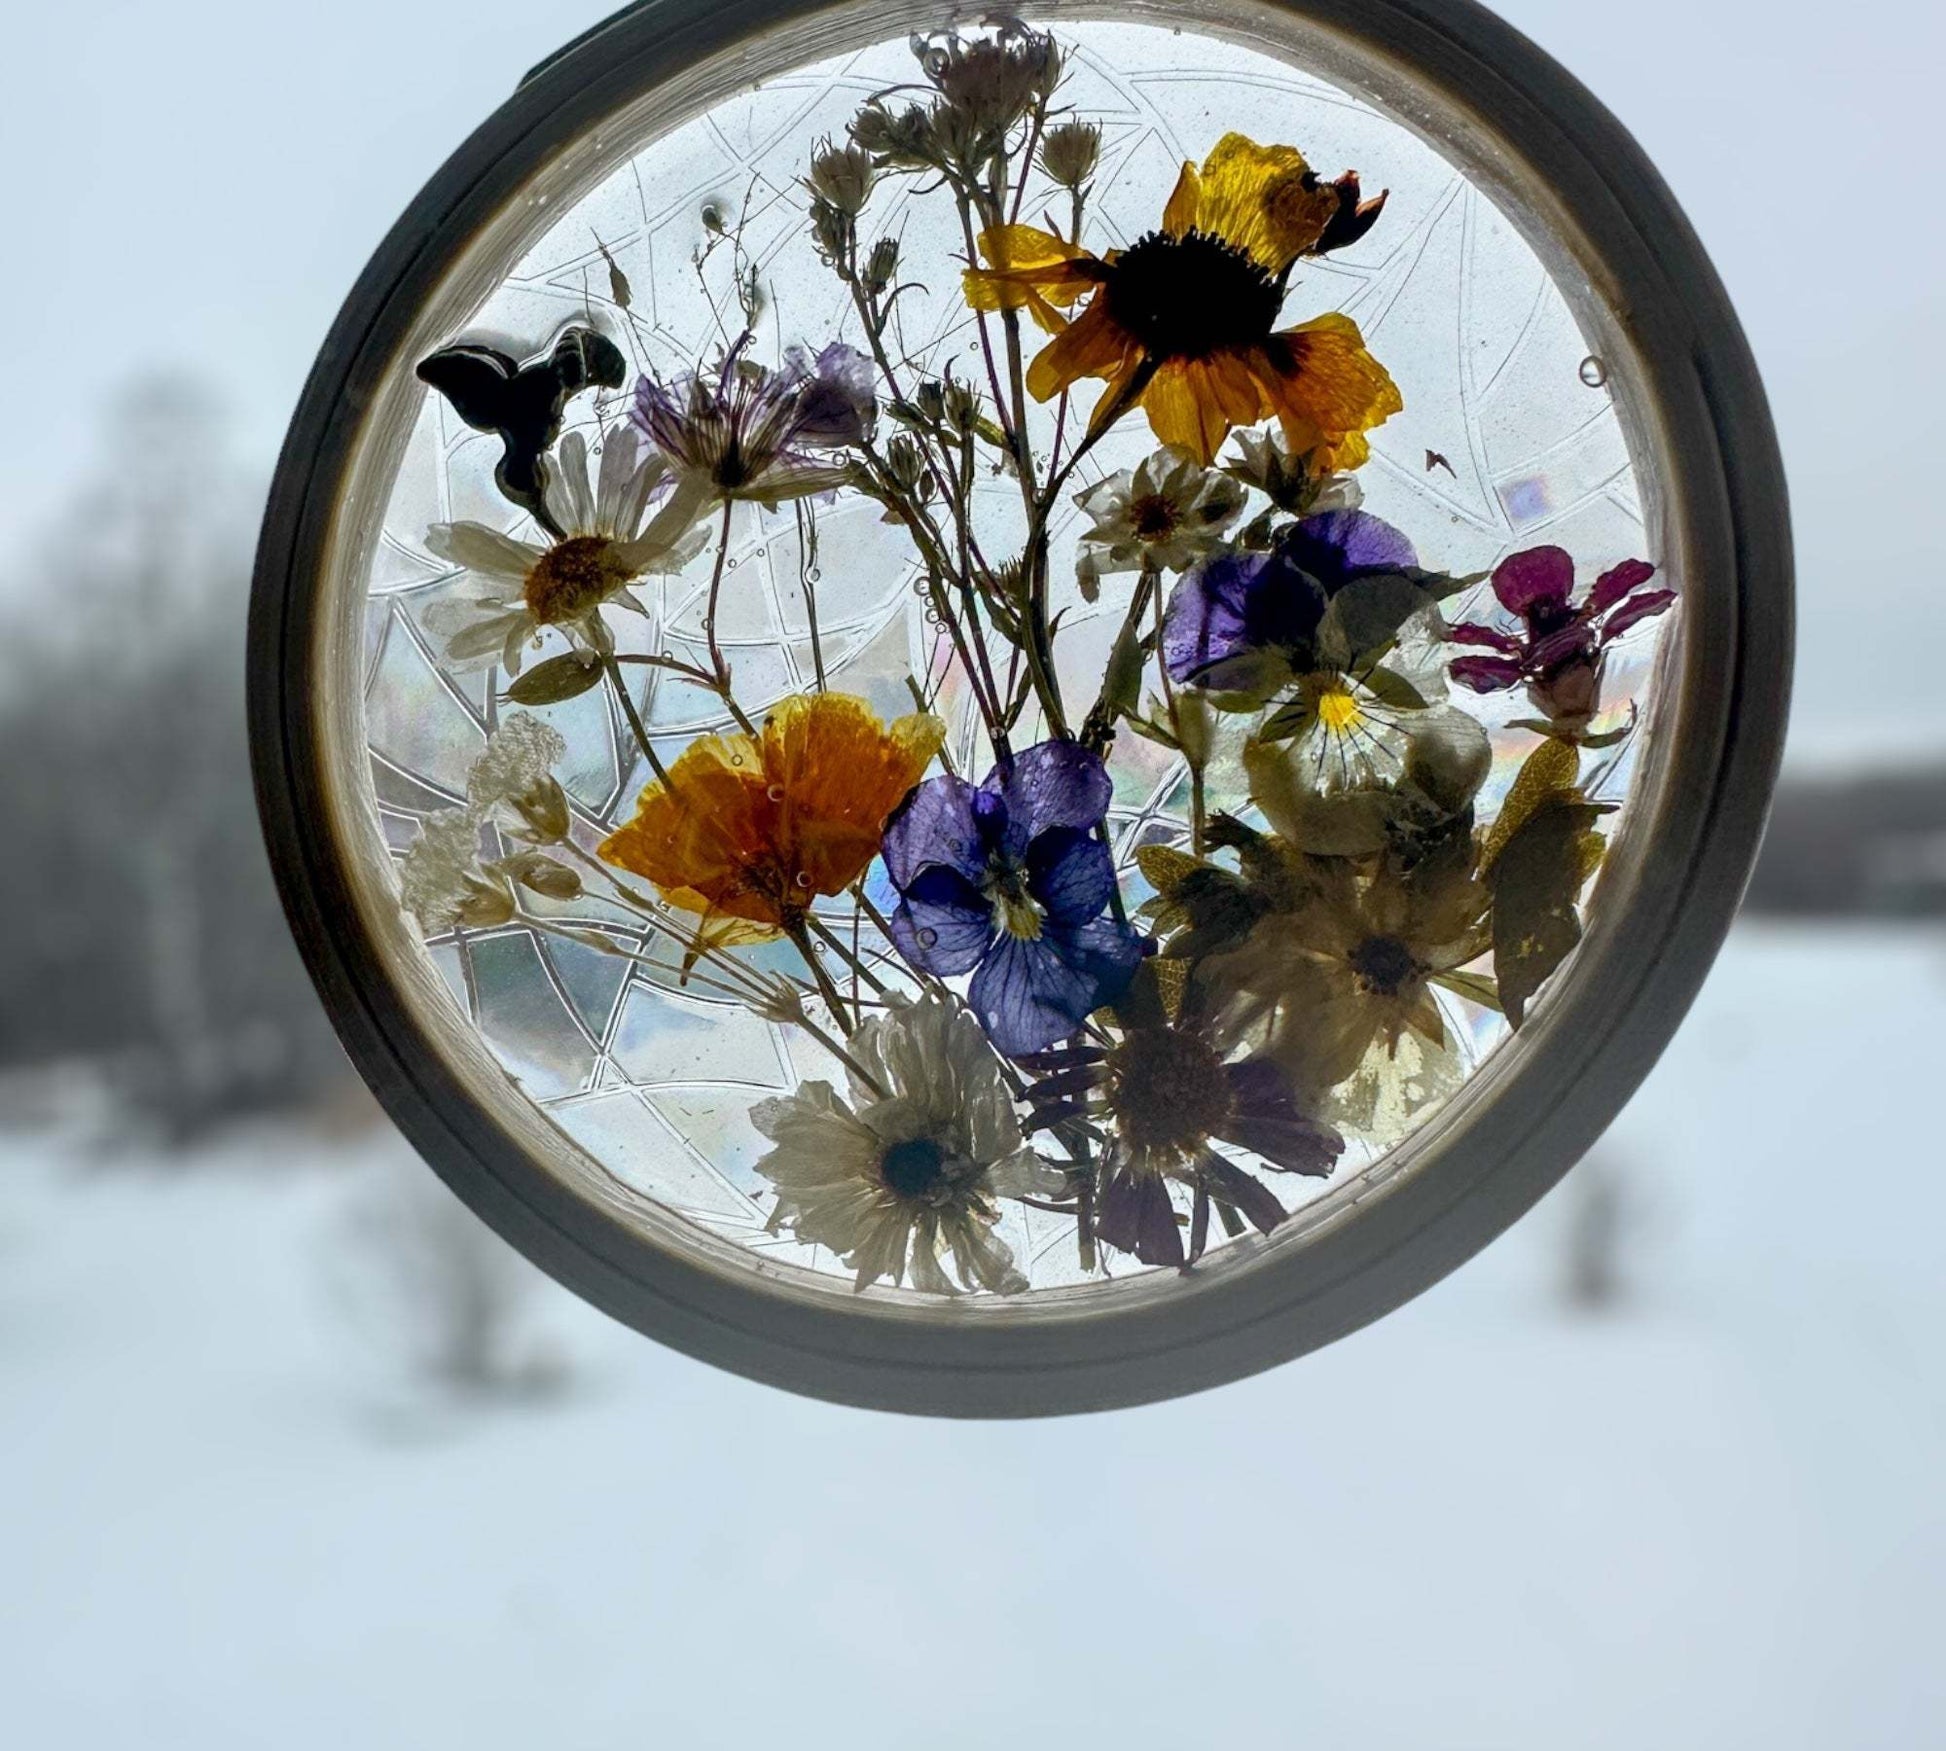 Floral Suncatcher with Rainbow Effect -Pressed Flowers and Hummingbird